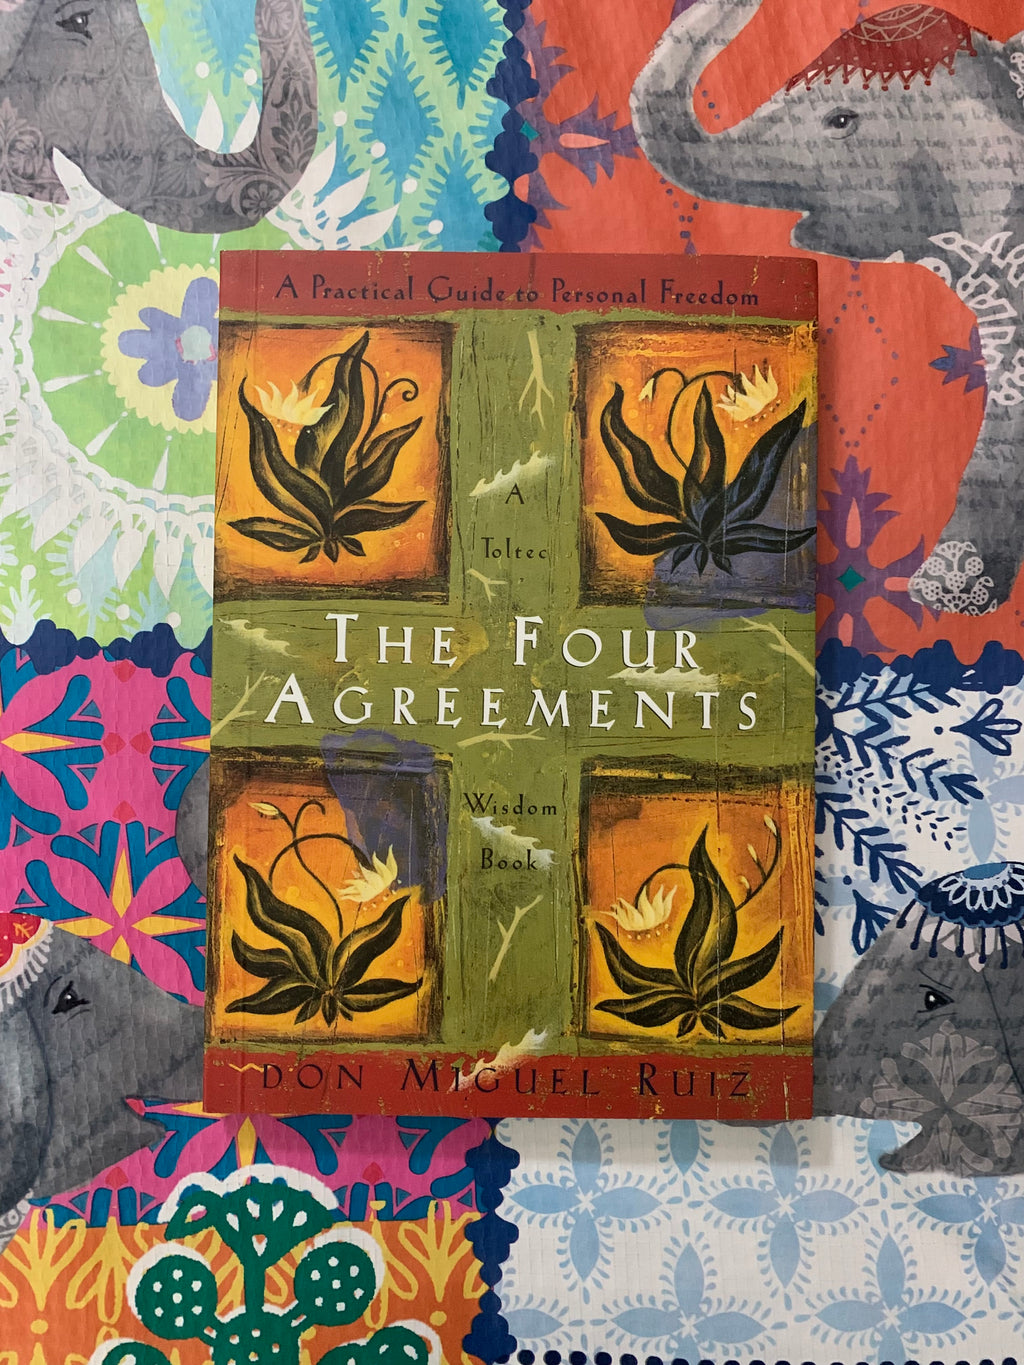 The Four Agreements: A Practical Guide to Personal Freedom- By Don Miguel Ruiz